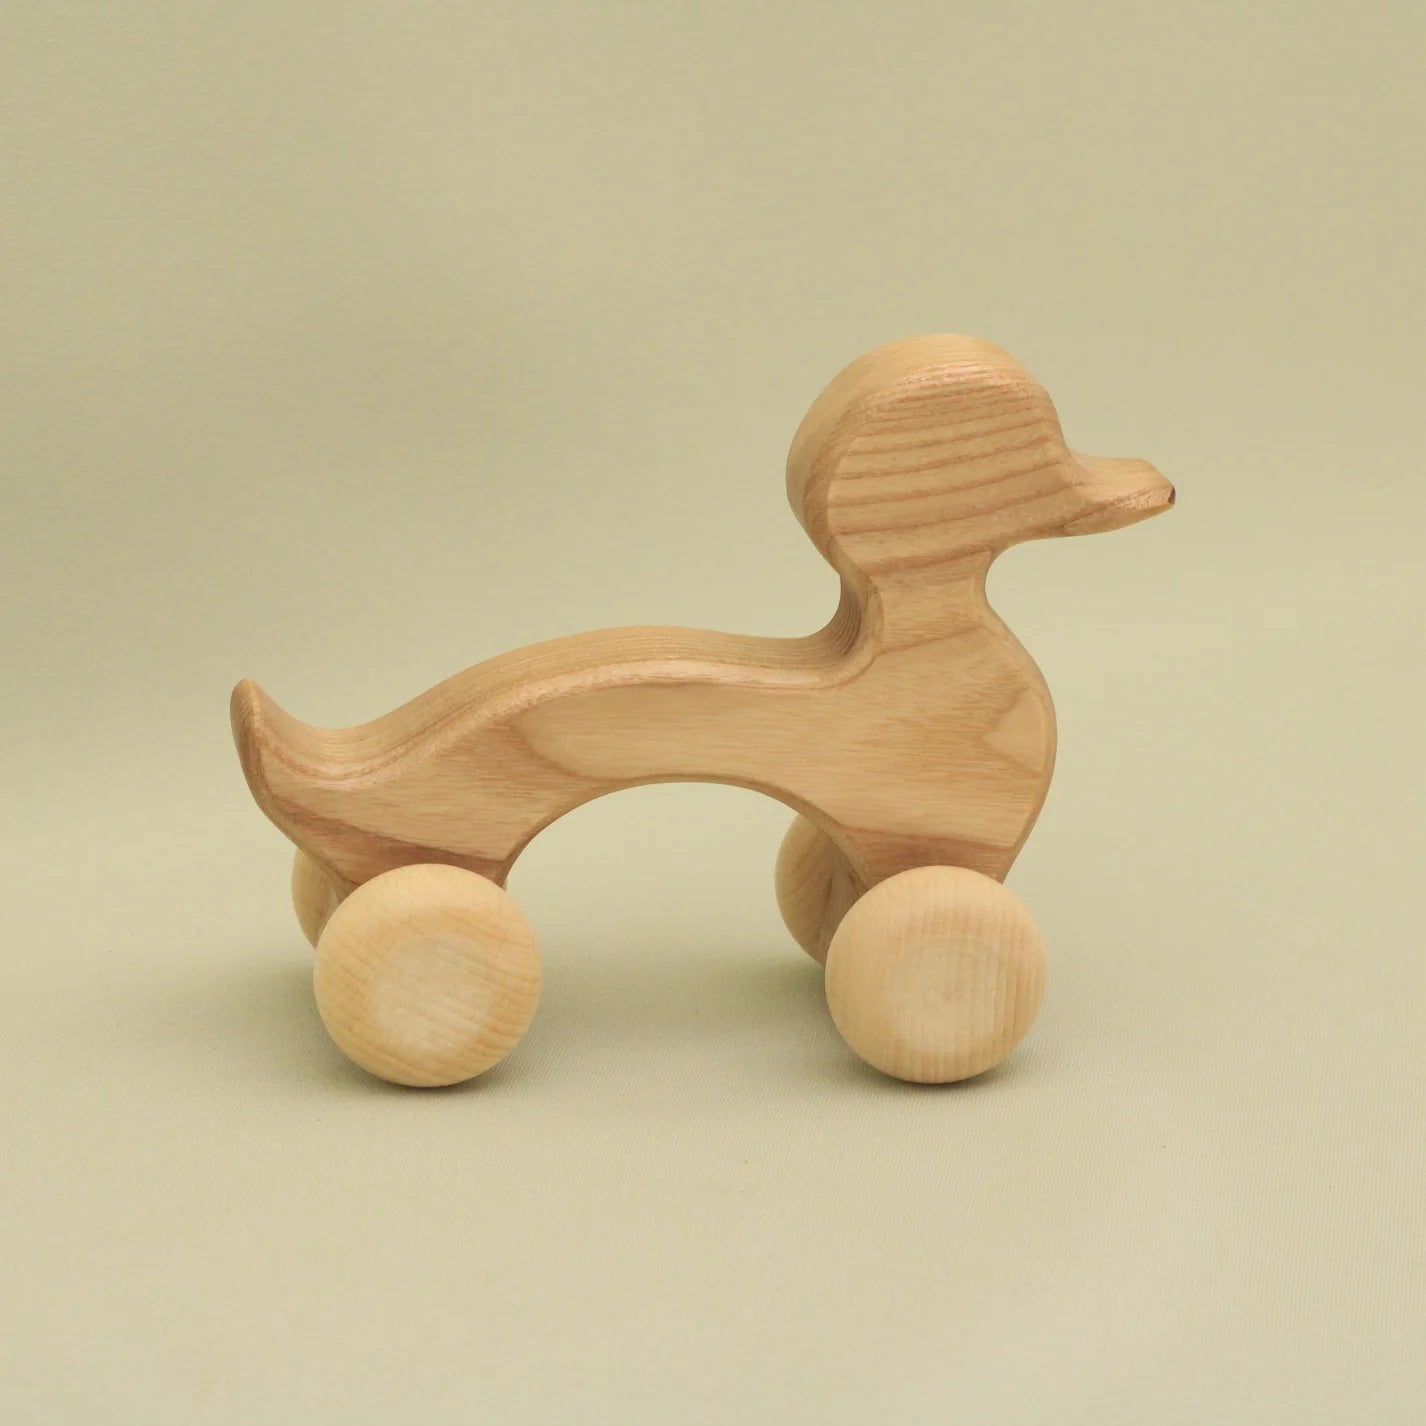 Wooden Duck Push Toy with Wheels